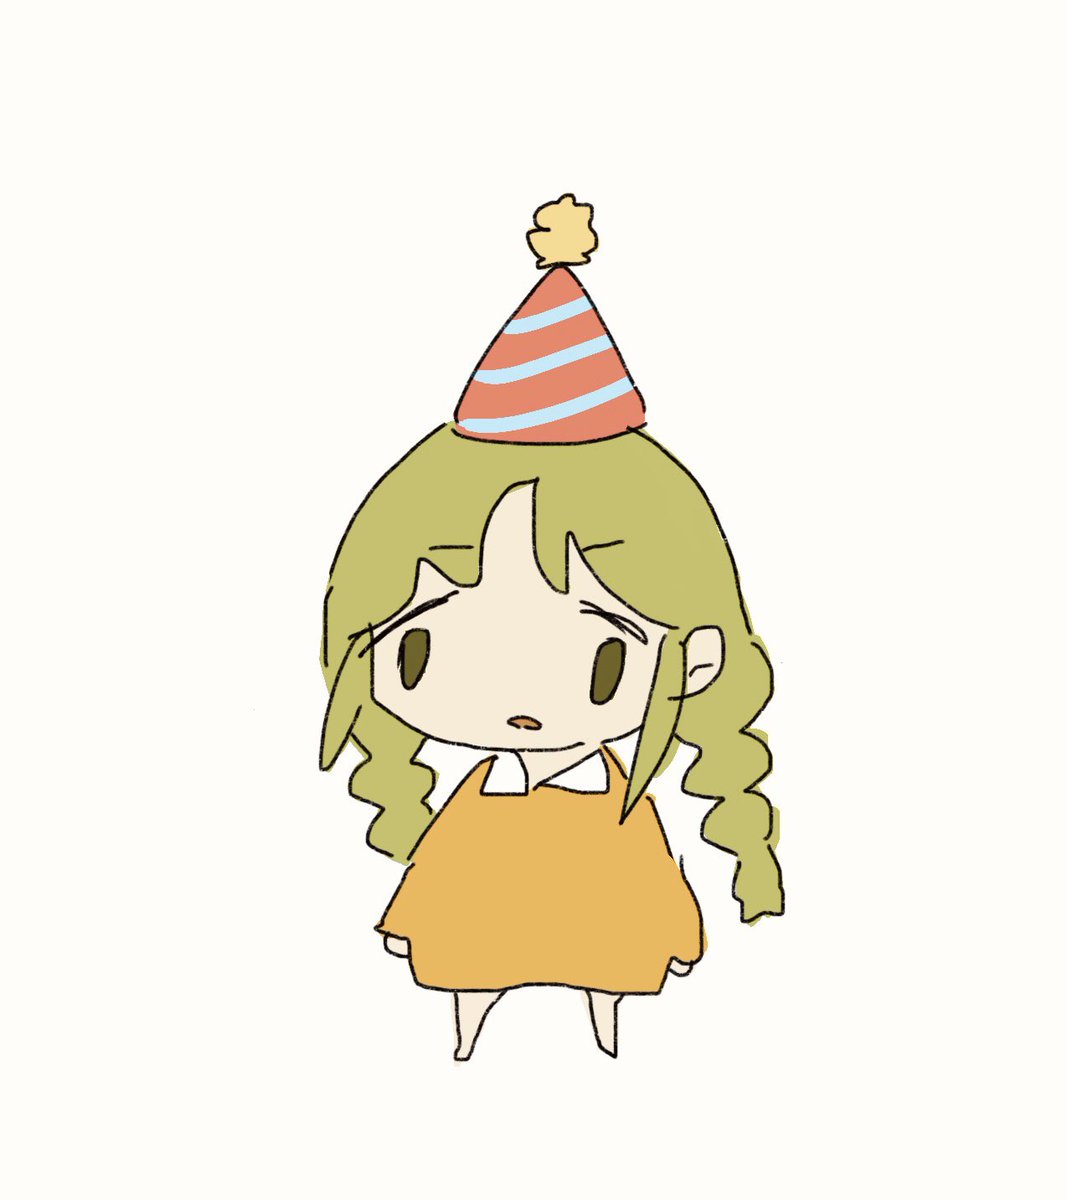 「the birth 」|carrot (is in thesis jail)のイラスト